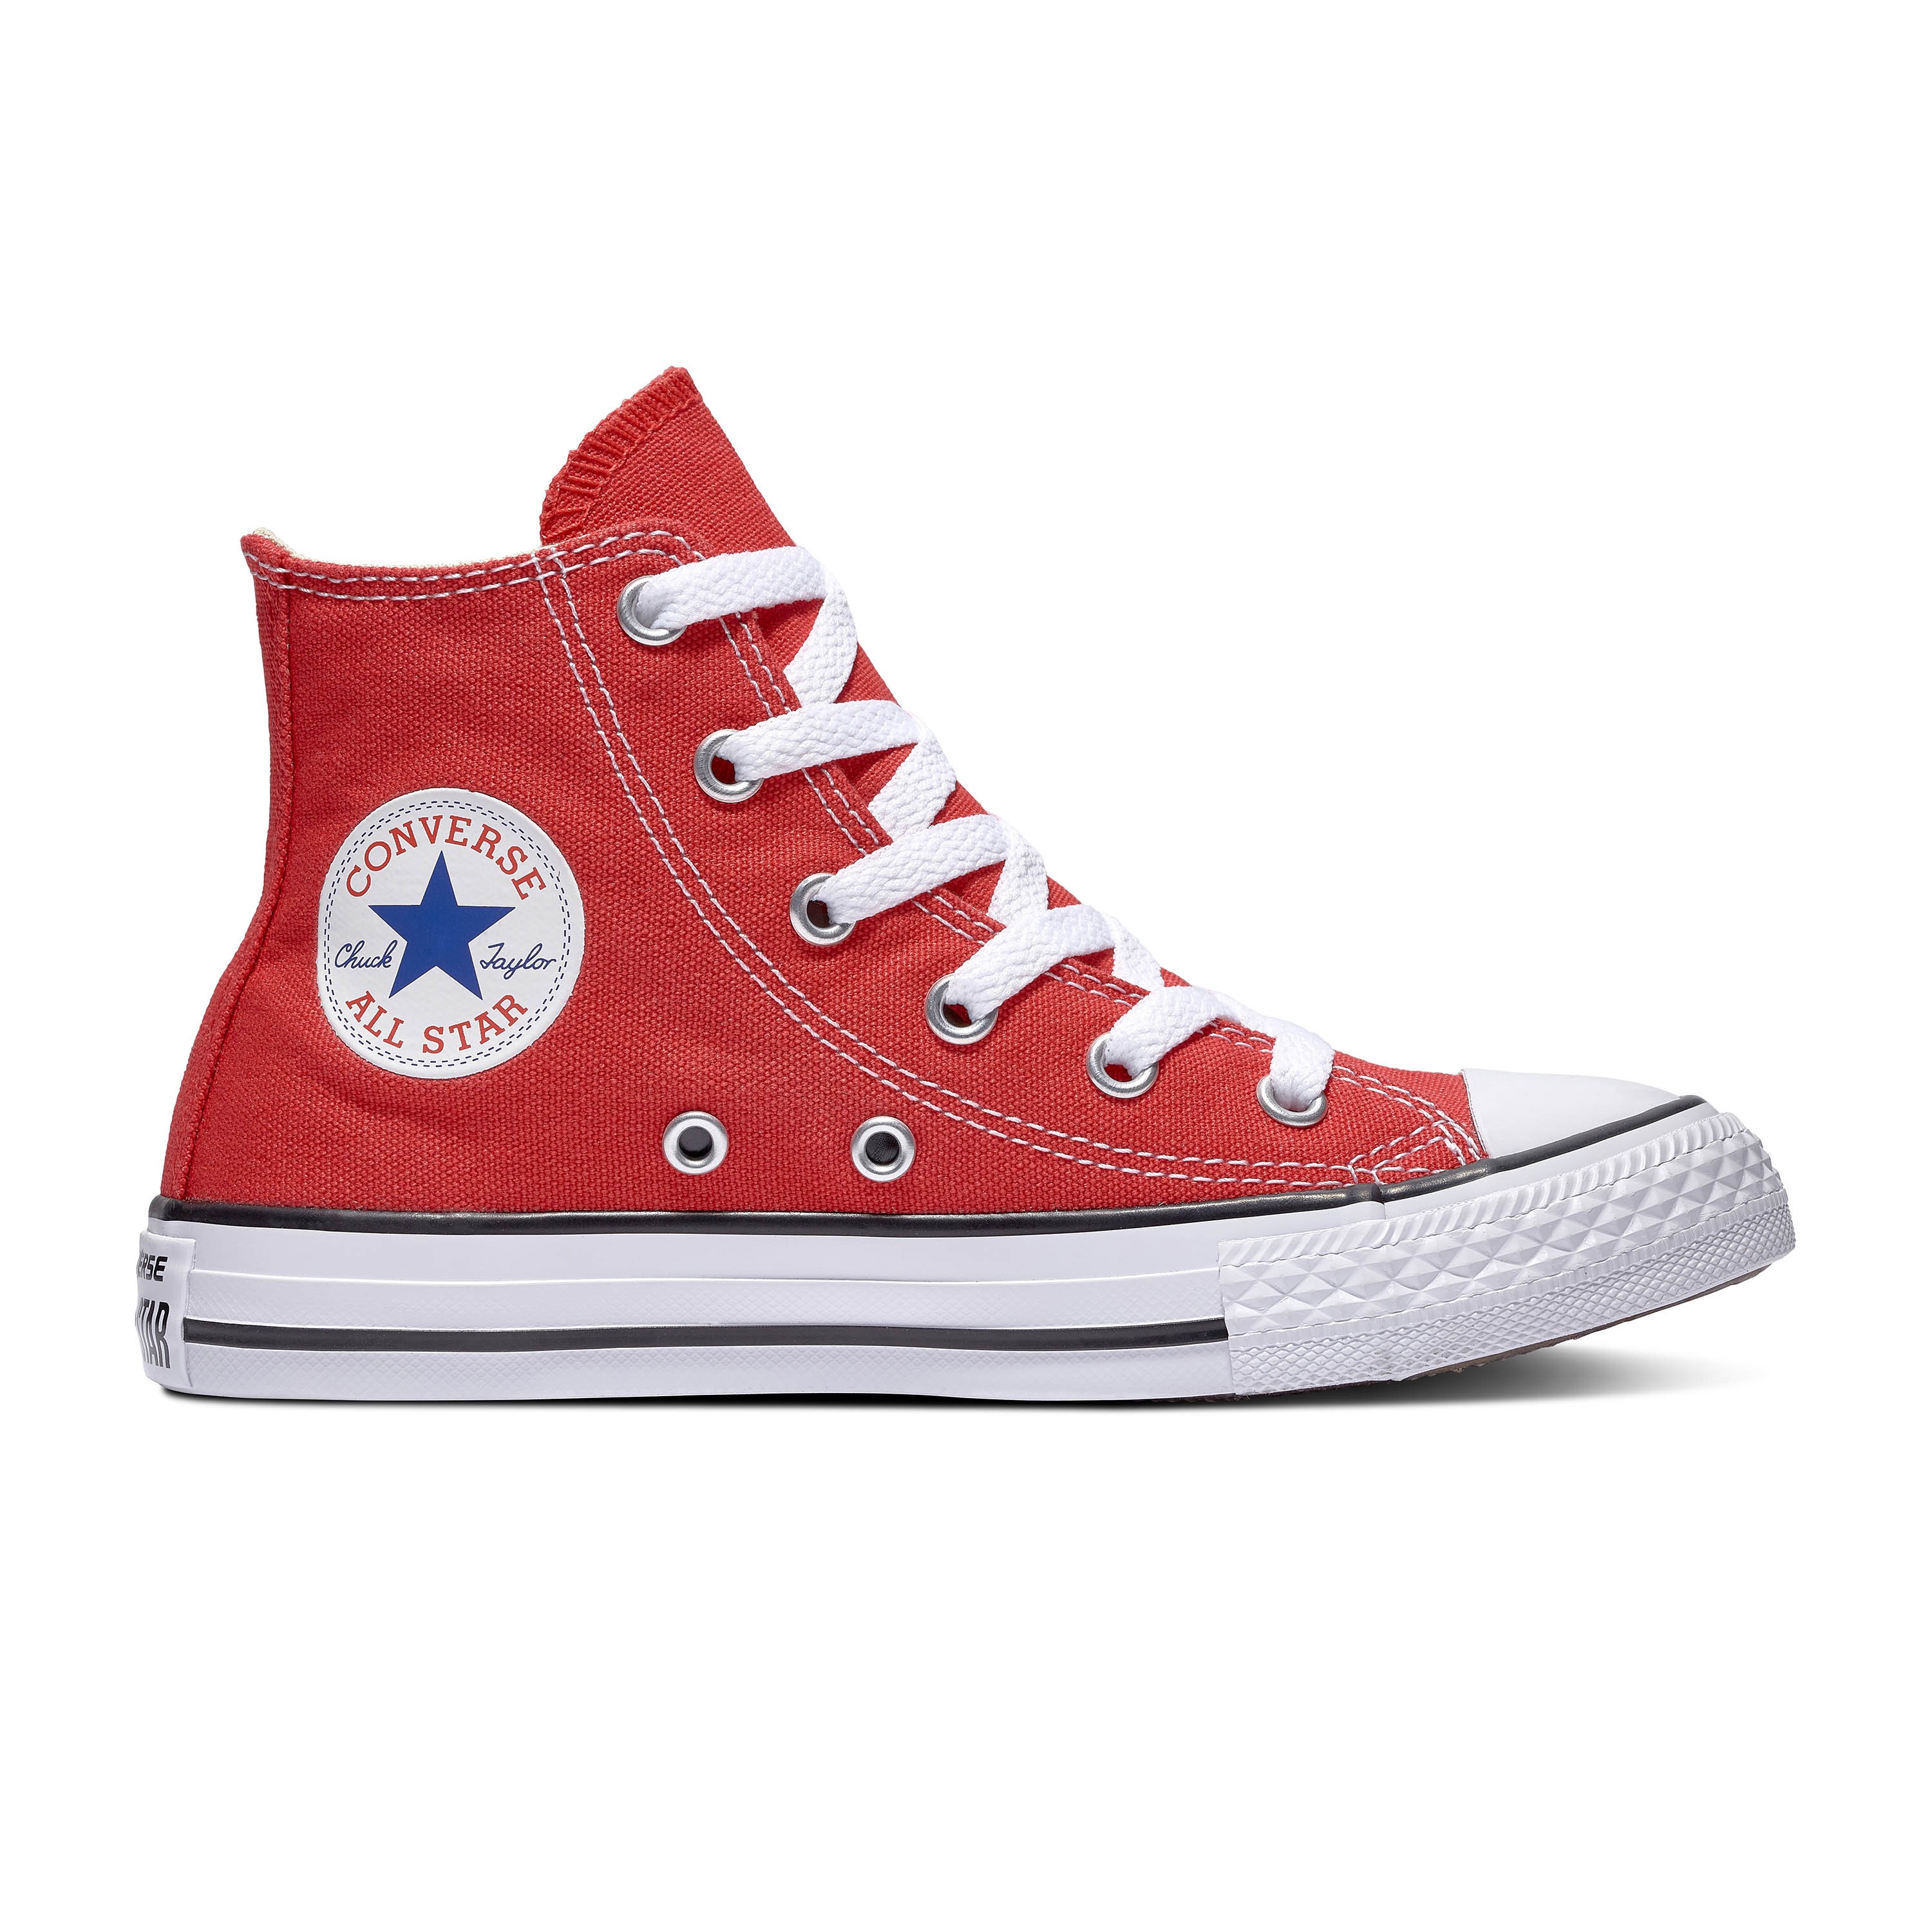 Children's Converse Chuck Taylor All Star High Top Sneaker - image 1 of 11